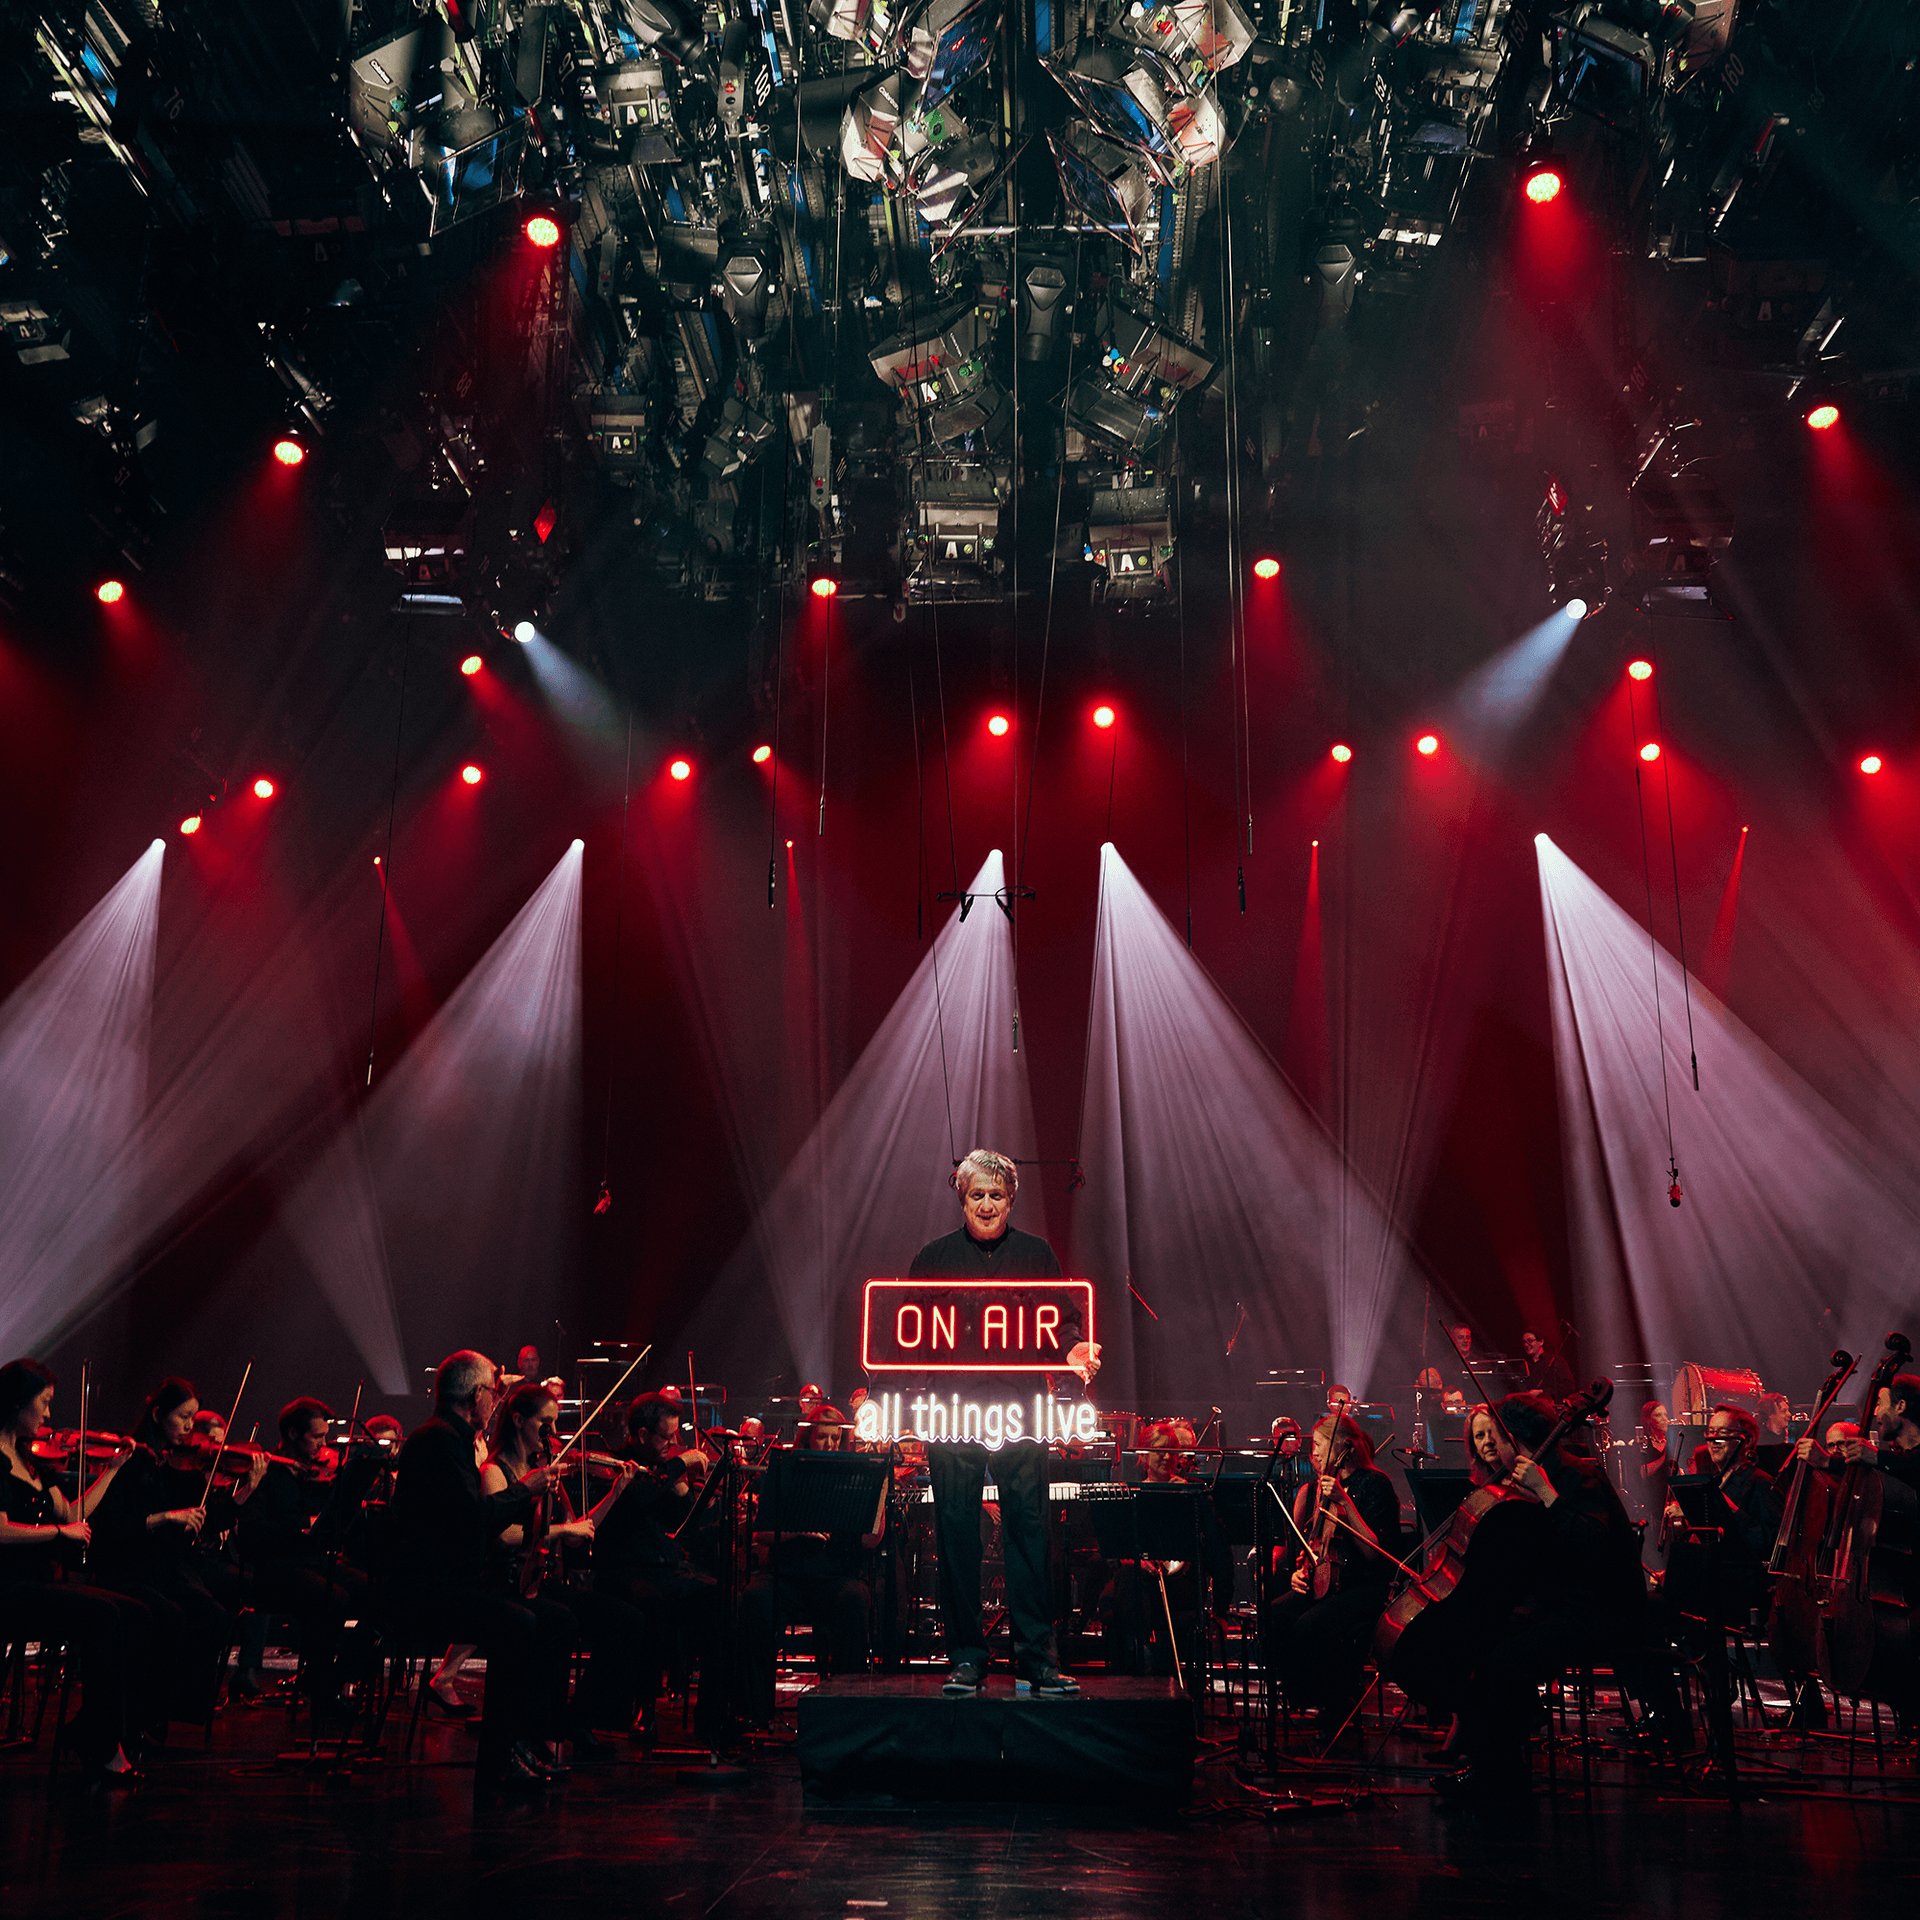 Conductor Peter Breiner holding an On Air neon sign with the Royal Philharmonic Orchestra behind him at the recording of the global livestream performances of Igor Stravinsky's The Firebird, Petrushka and the Rite Of Spring at BBC Television Centre